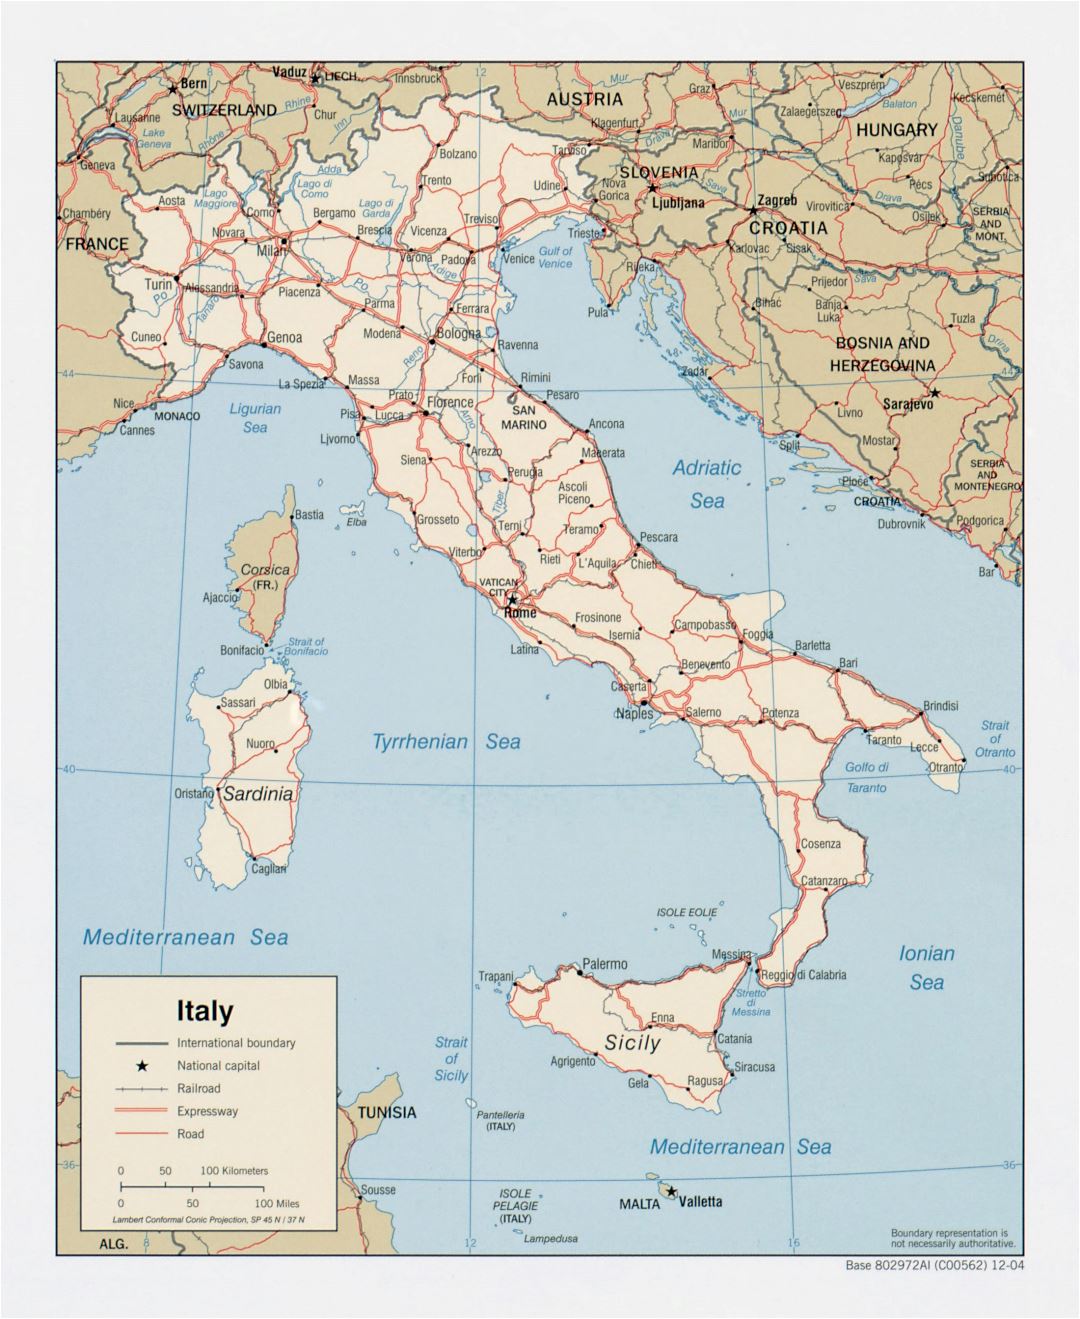 Large scale political map of Italy with roads, railroads and major cities - 2004